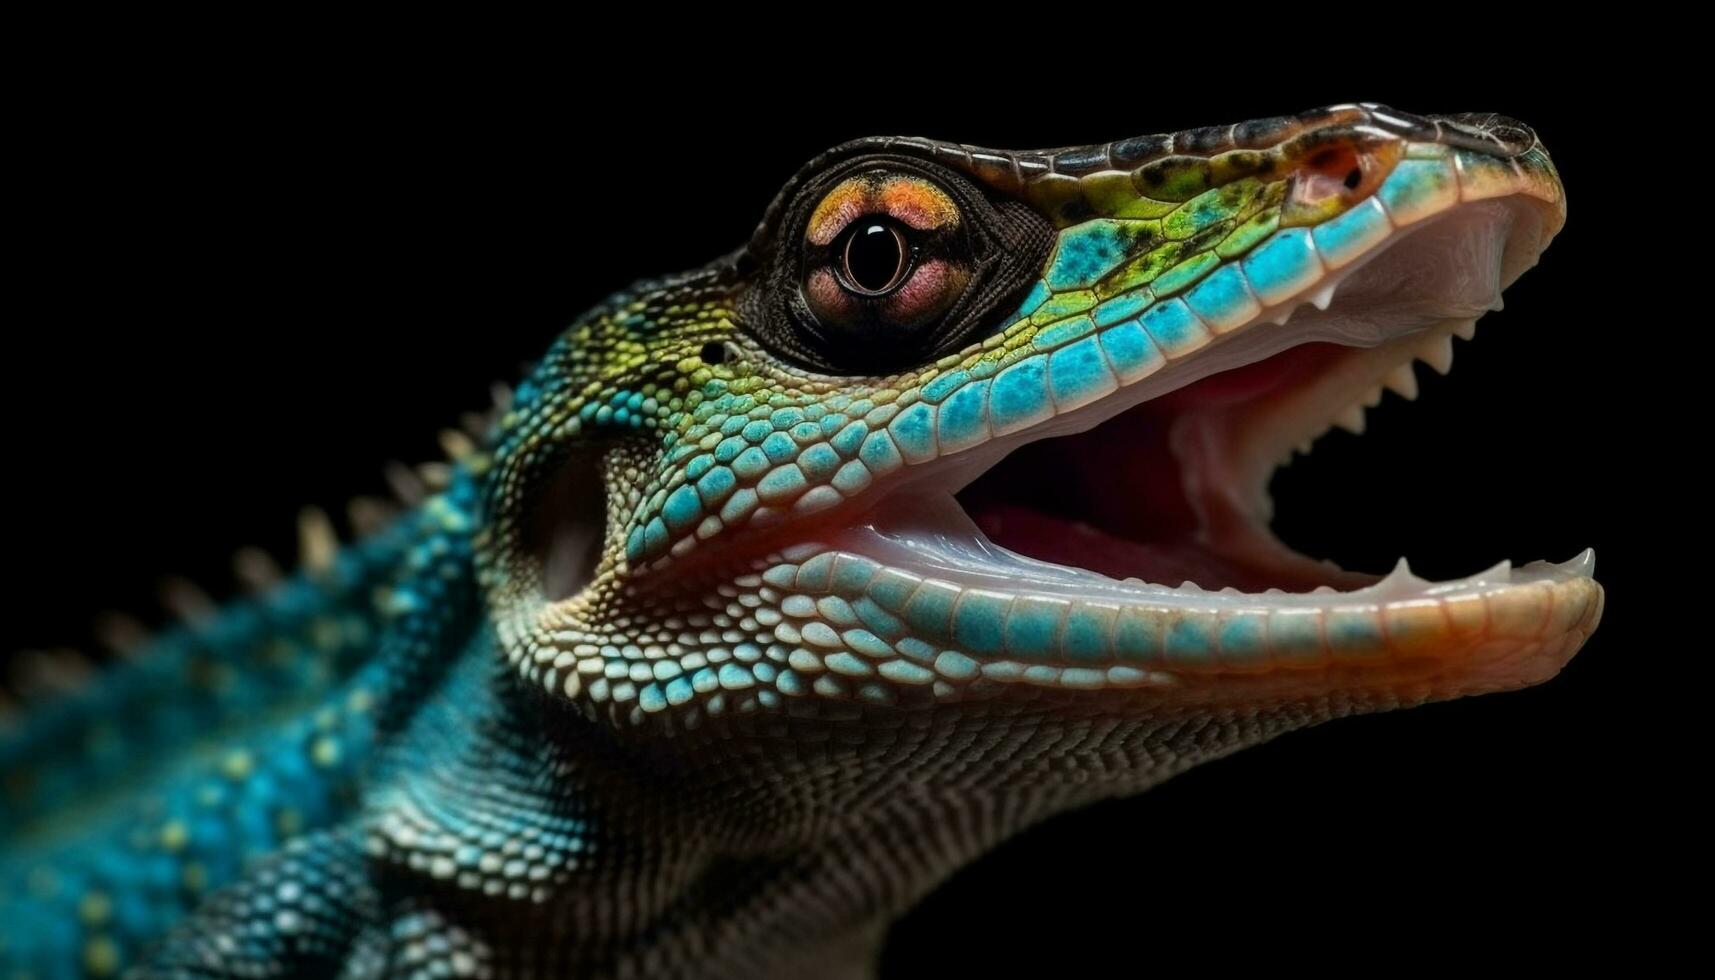 Furious dragon green tongue and teeth in close up portrait generated by AI photo